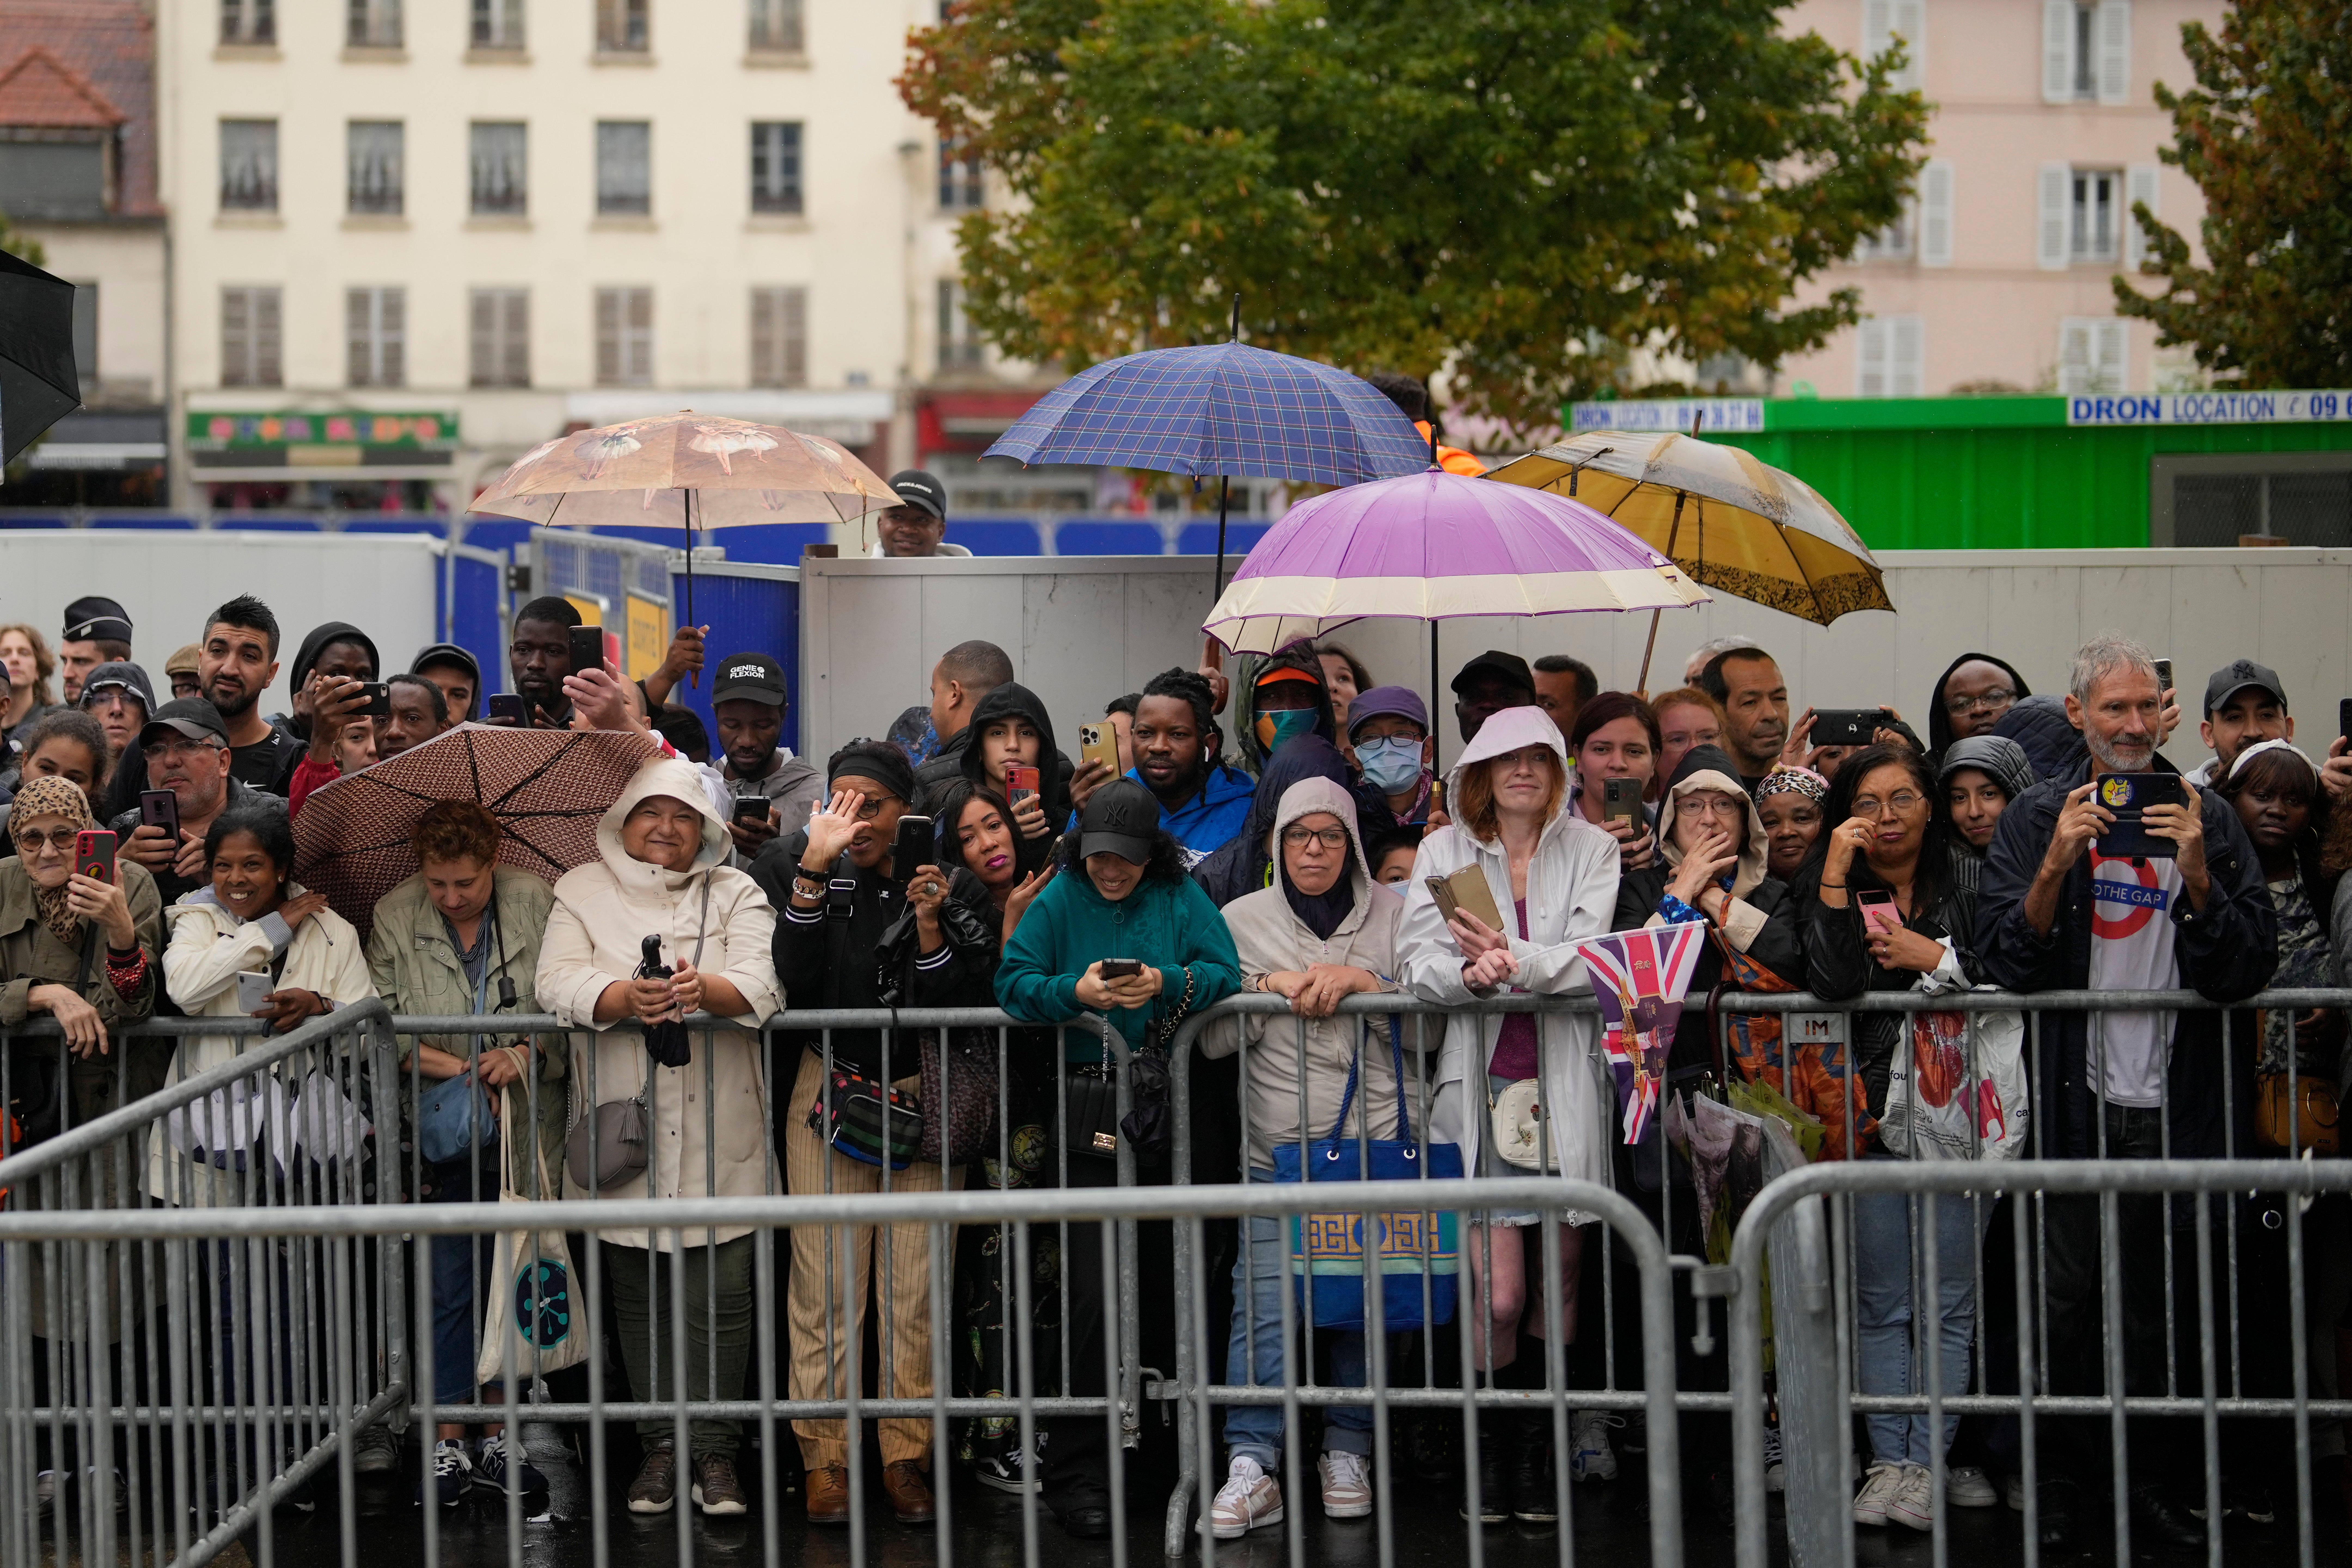 Residents wait to see Charles Camilla on Thursday in Saint-Denis outside Paris